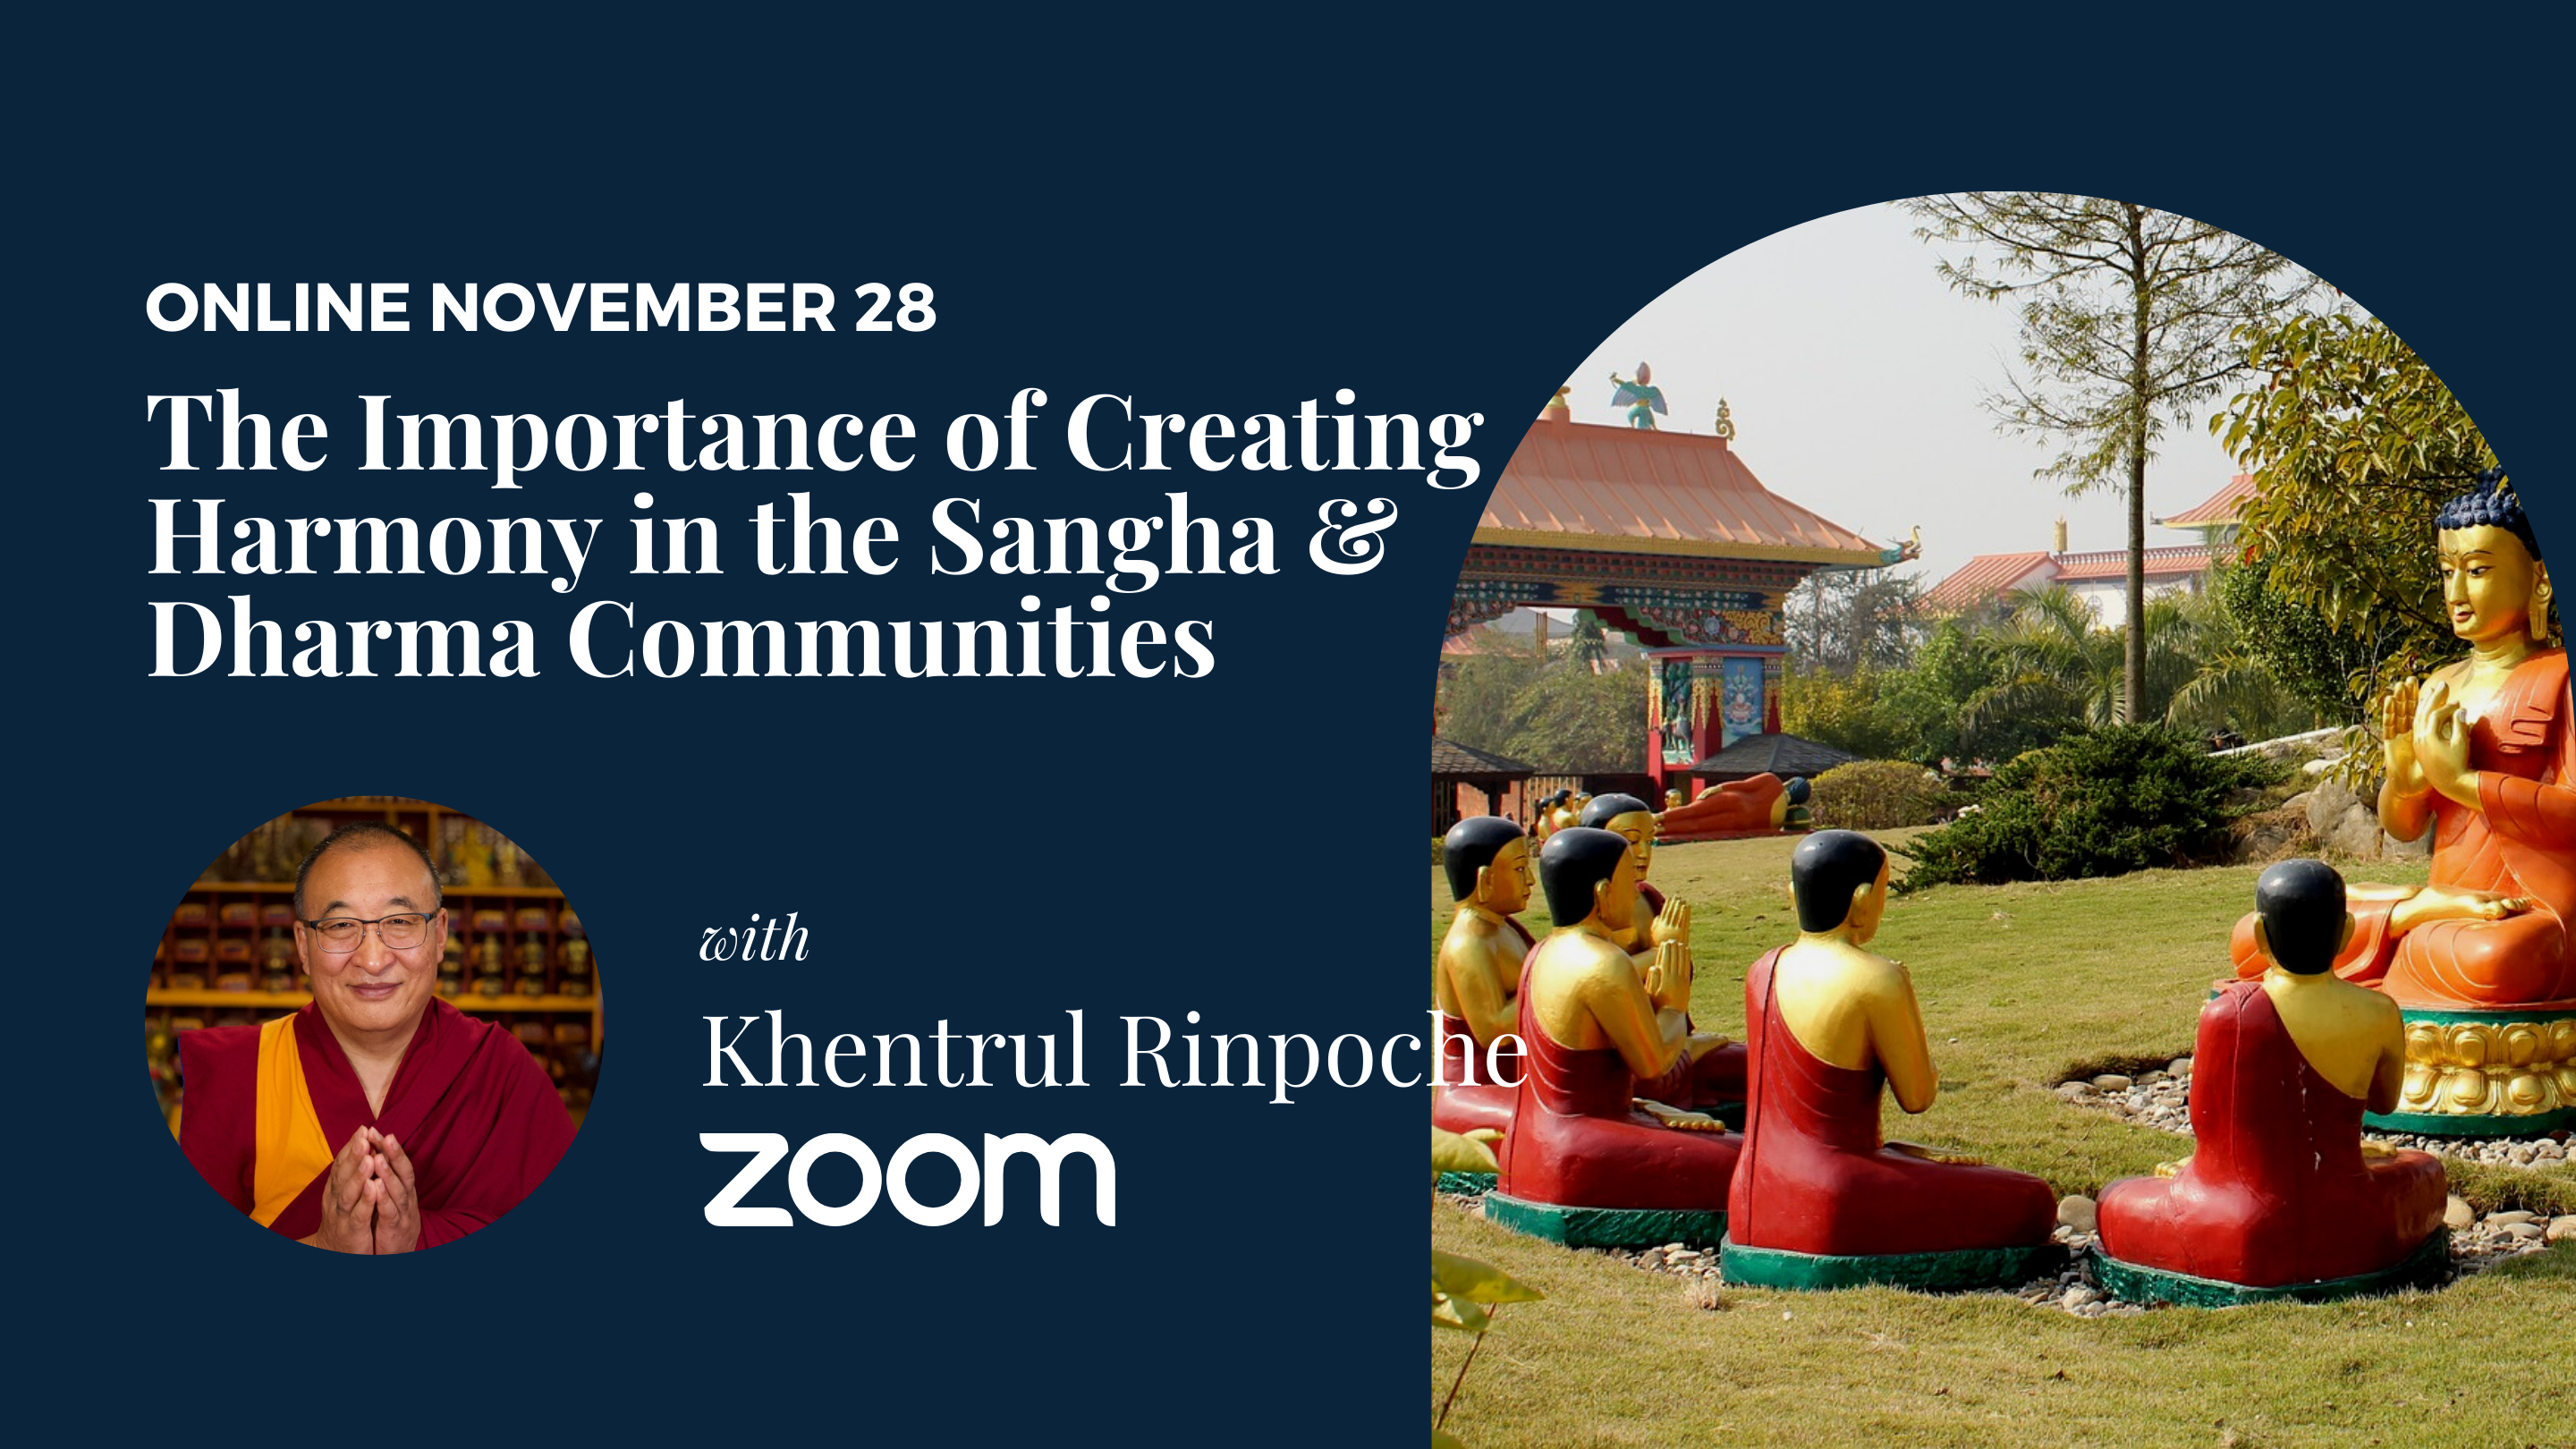 Online: The Importance of Creating Peace and Harmony in the Sangha & Dharma Community with Rinpoche